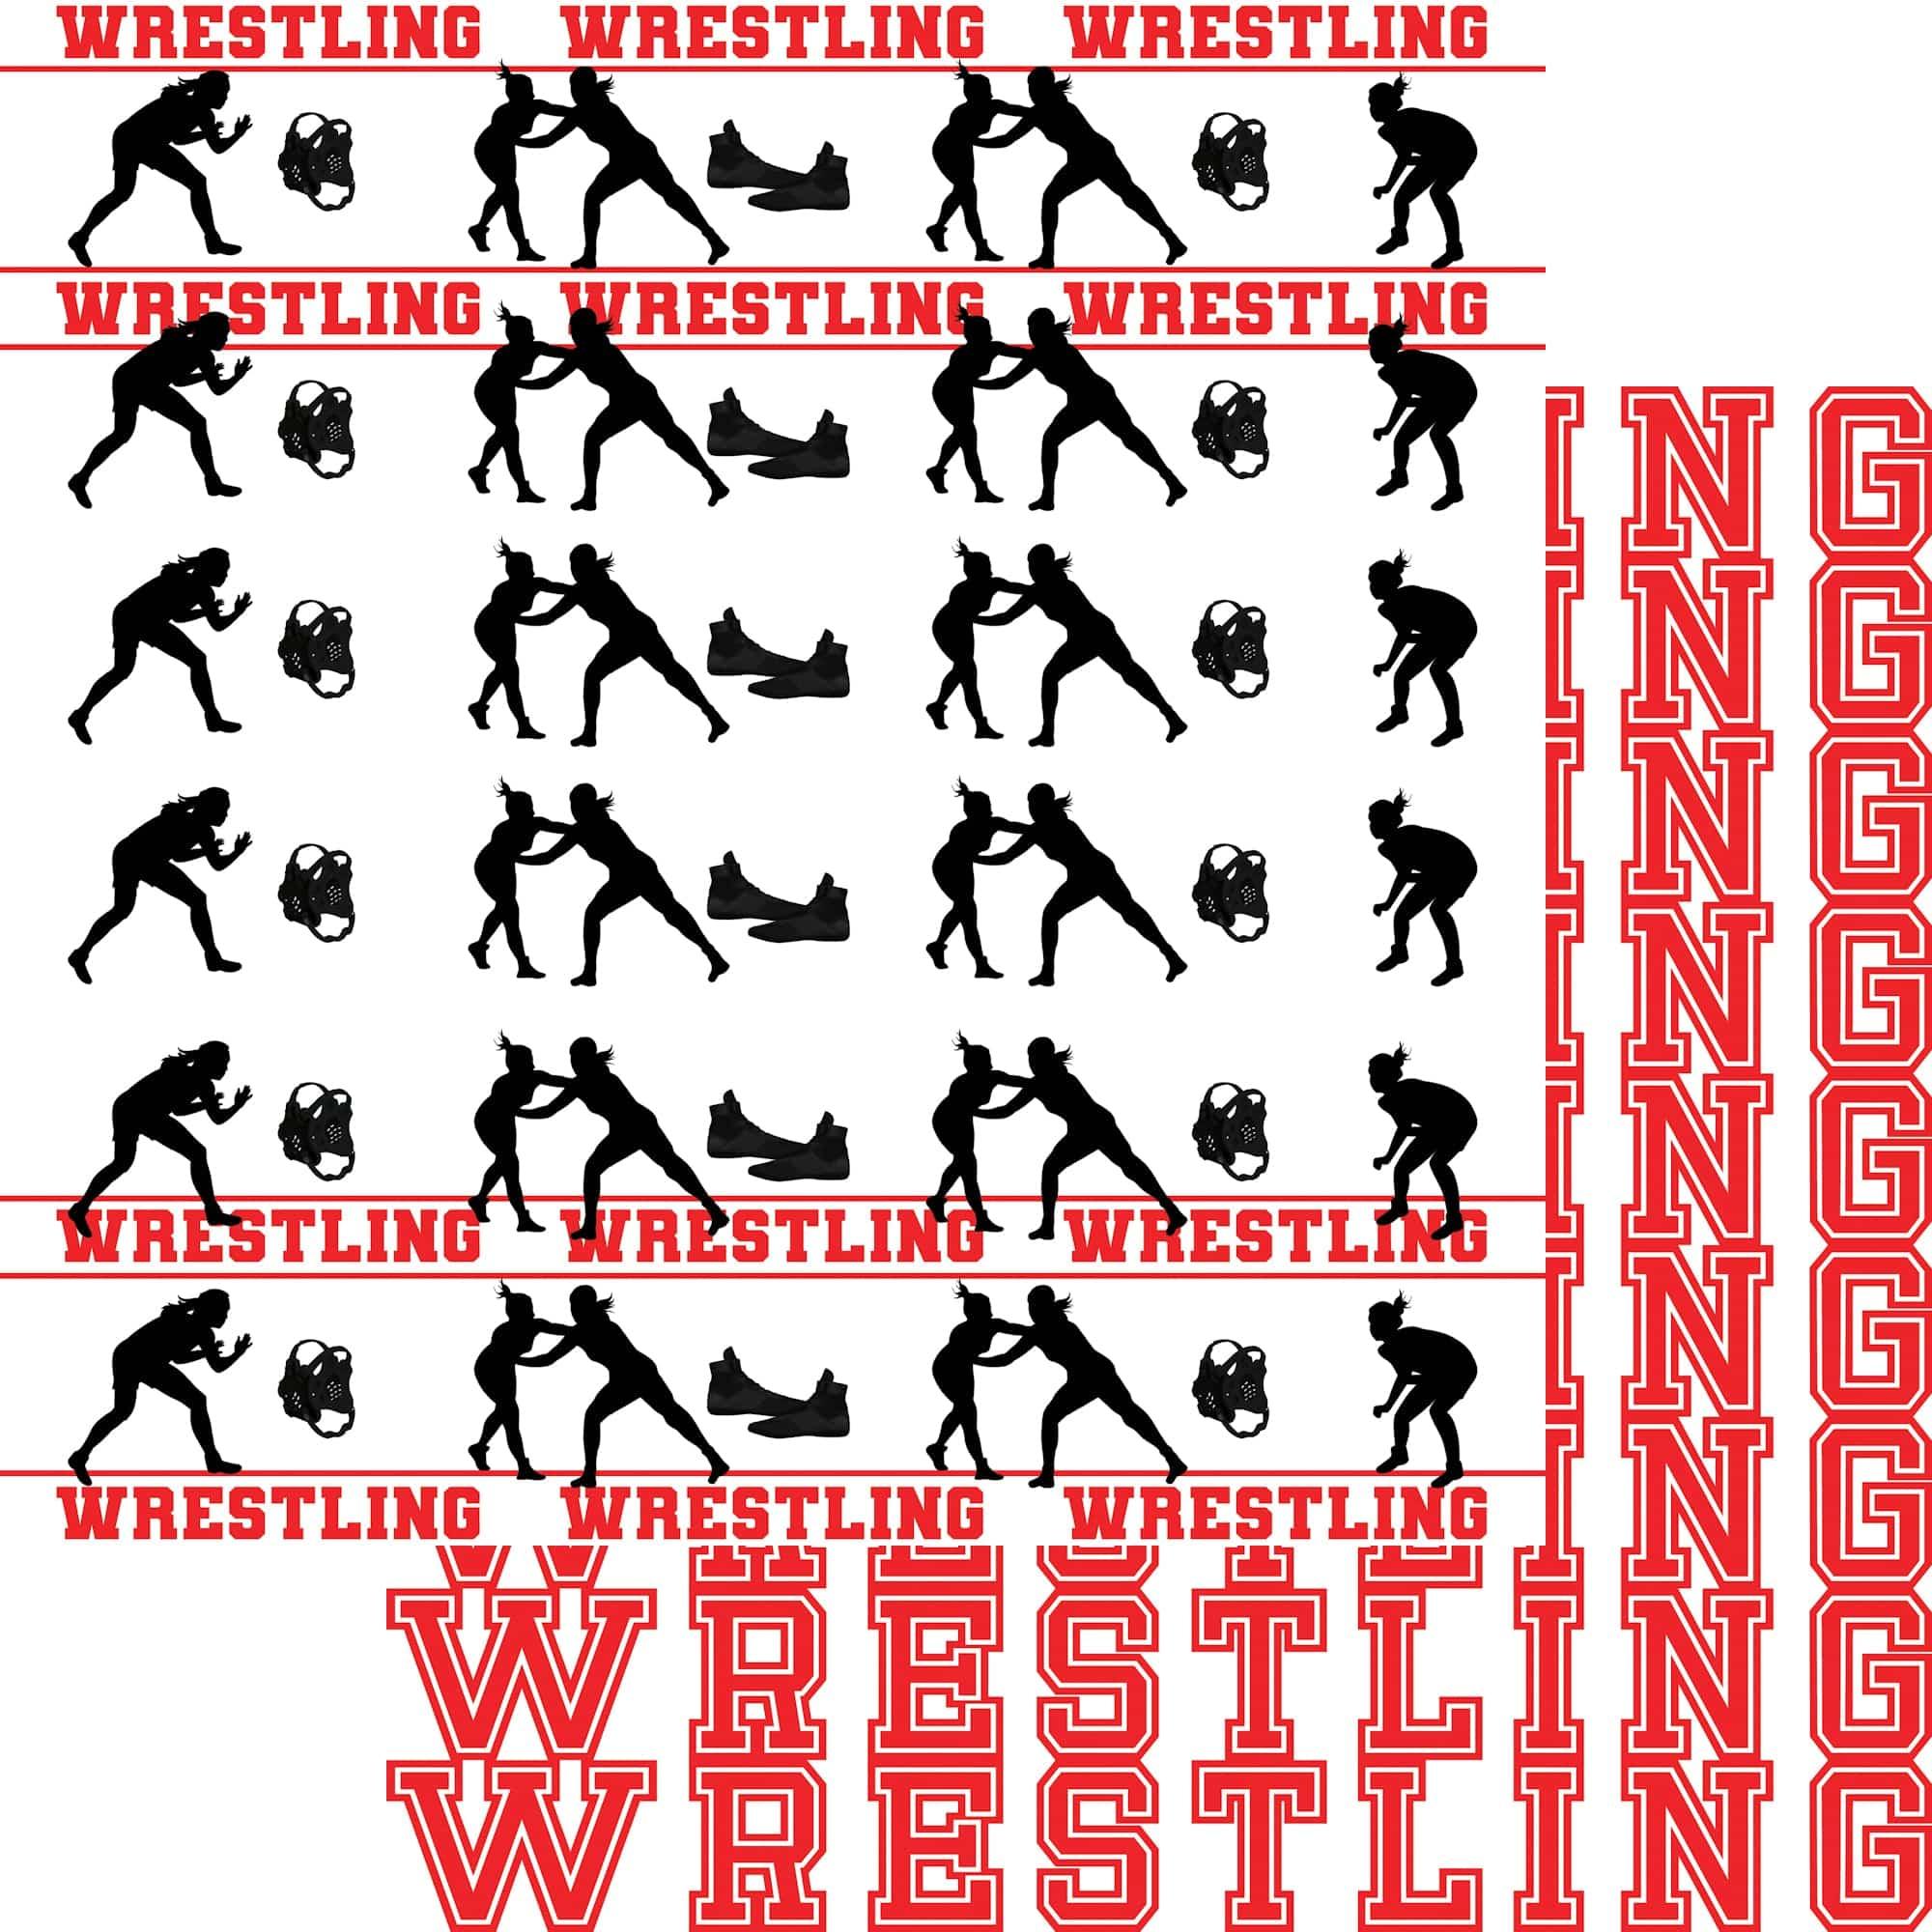 Female Wrestling Collection Wrestling Takedown 12 x 12 Double-Sided Scrapbook Paper by SSC Designs - Scrapbook Supply Companies